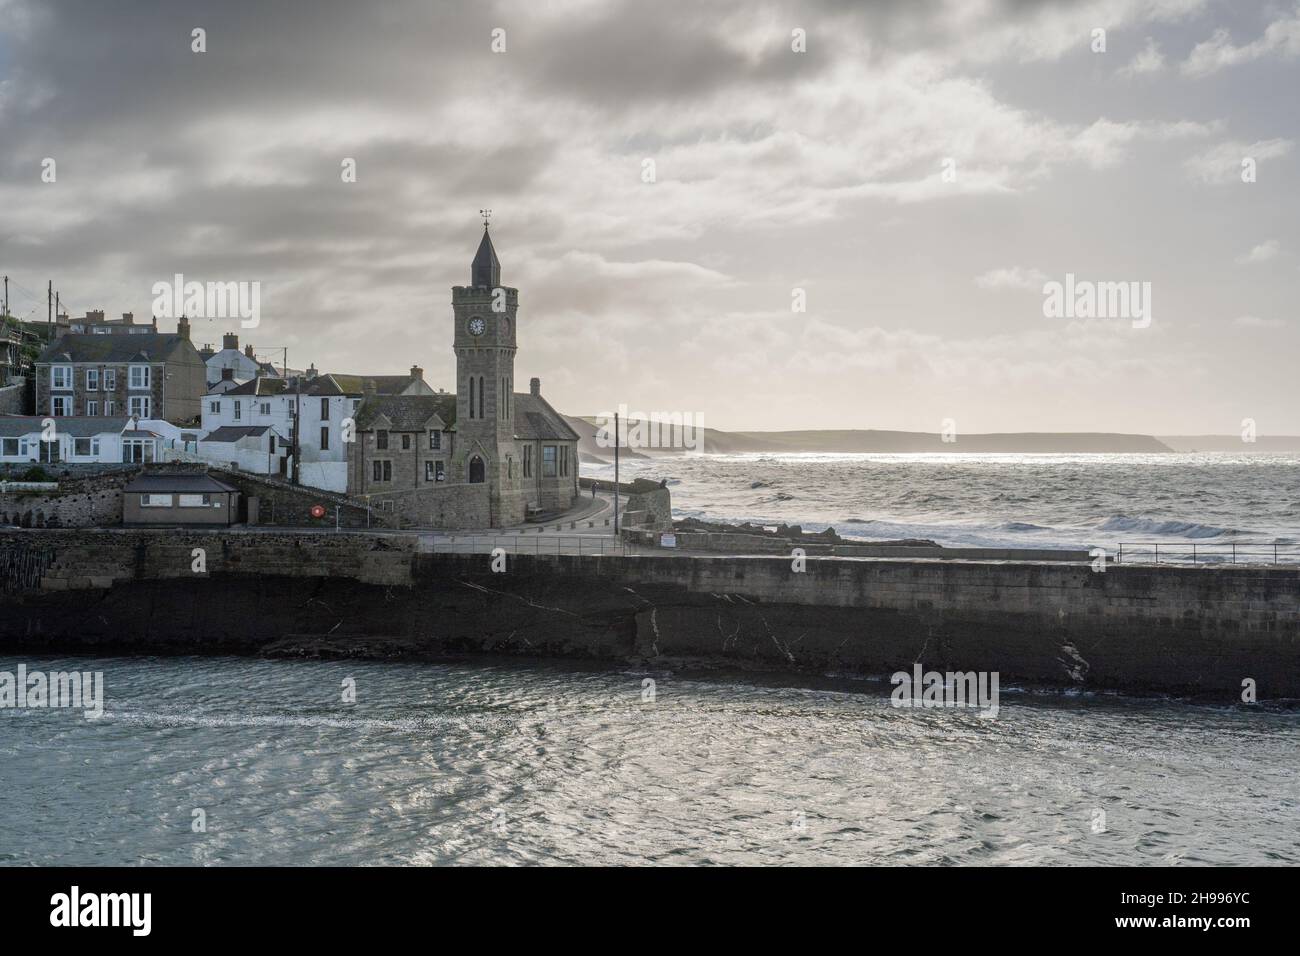 The popular town of Porthleven in Cornwall with it's picturesque fishing harbour and charming local scenery Stock Photo